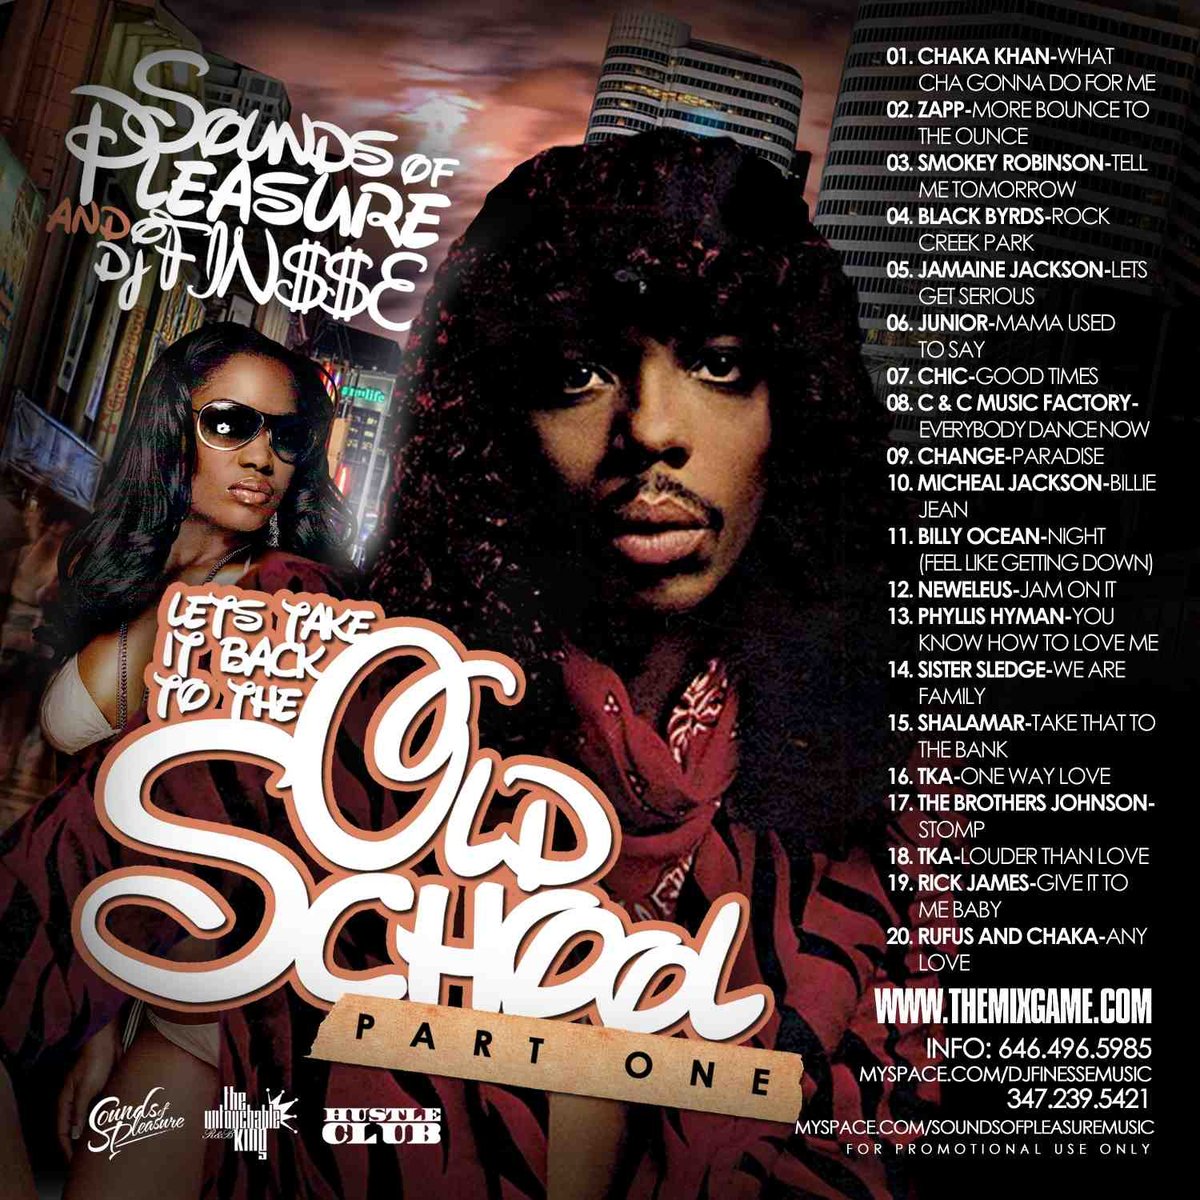 Dj Finesse Mixtapes — Lets Take It Back To The Old School Mix Vol 1